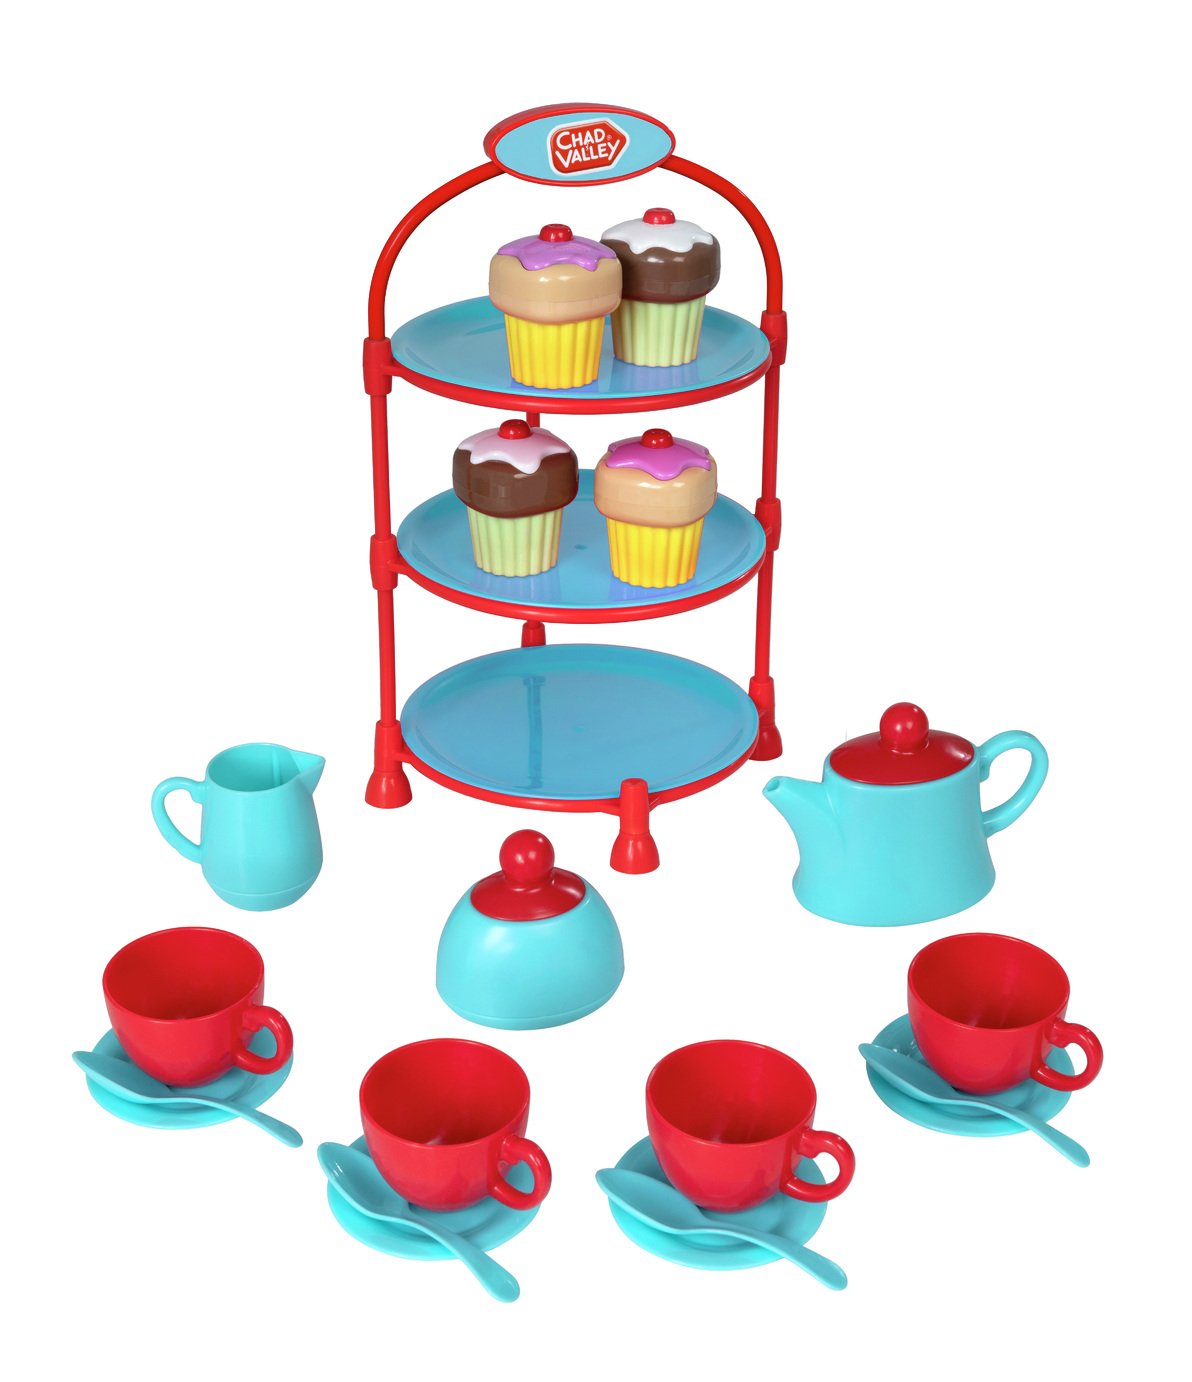 Chad Valley Afternoon Tea Set Review